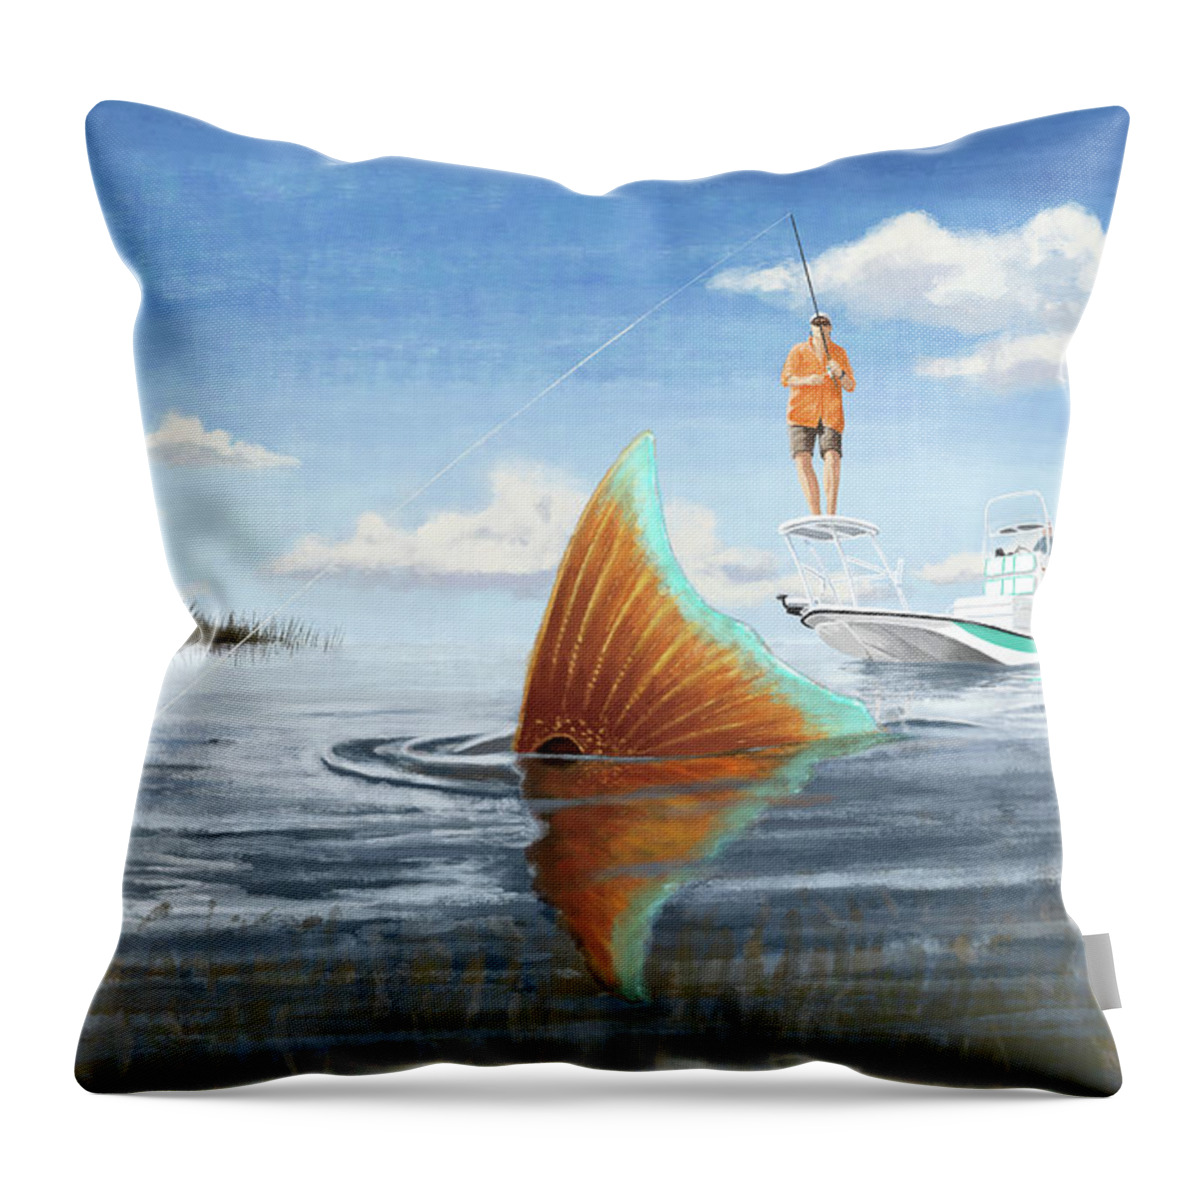 Red Fish Throw Pillow featuring the digital art Sweet Spot by Kevin Putman